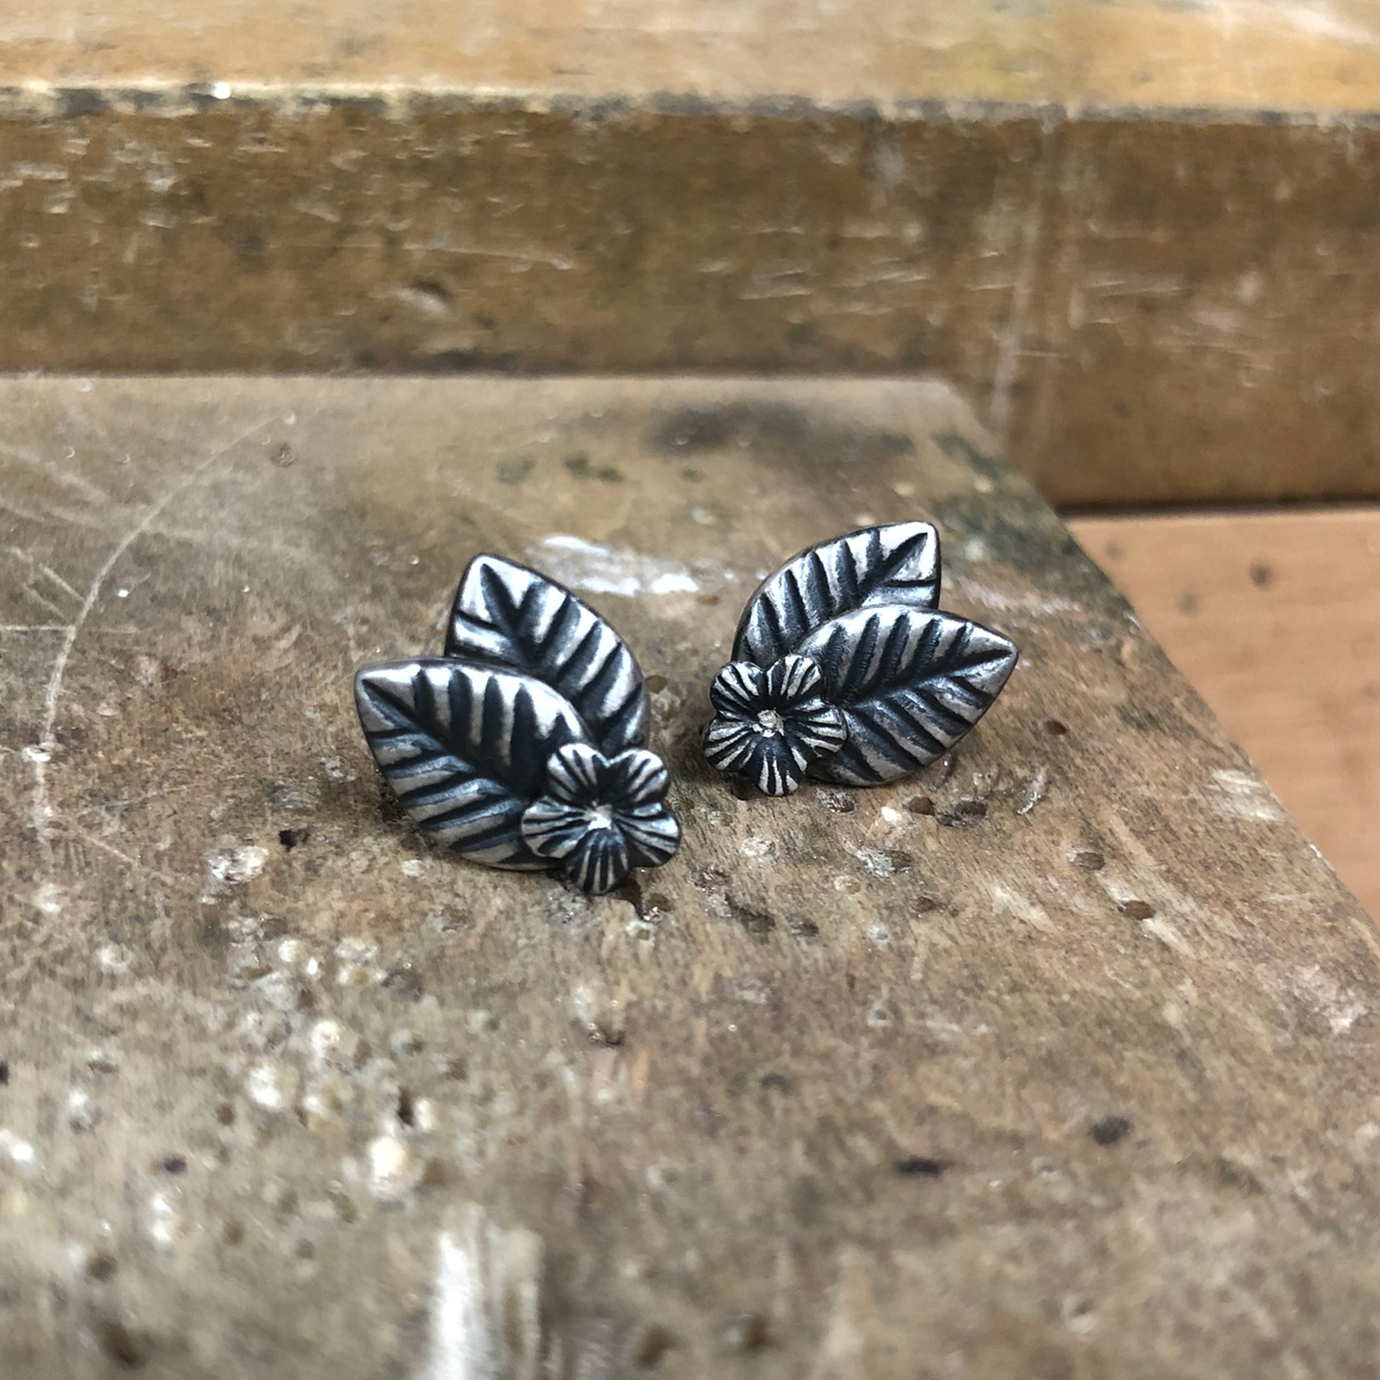 blackened silver studs with two leaves and a flower